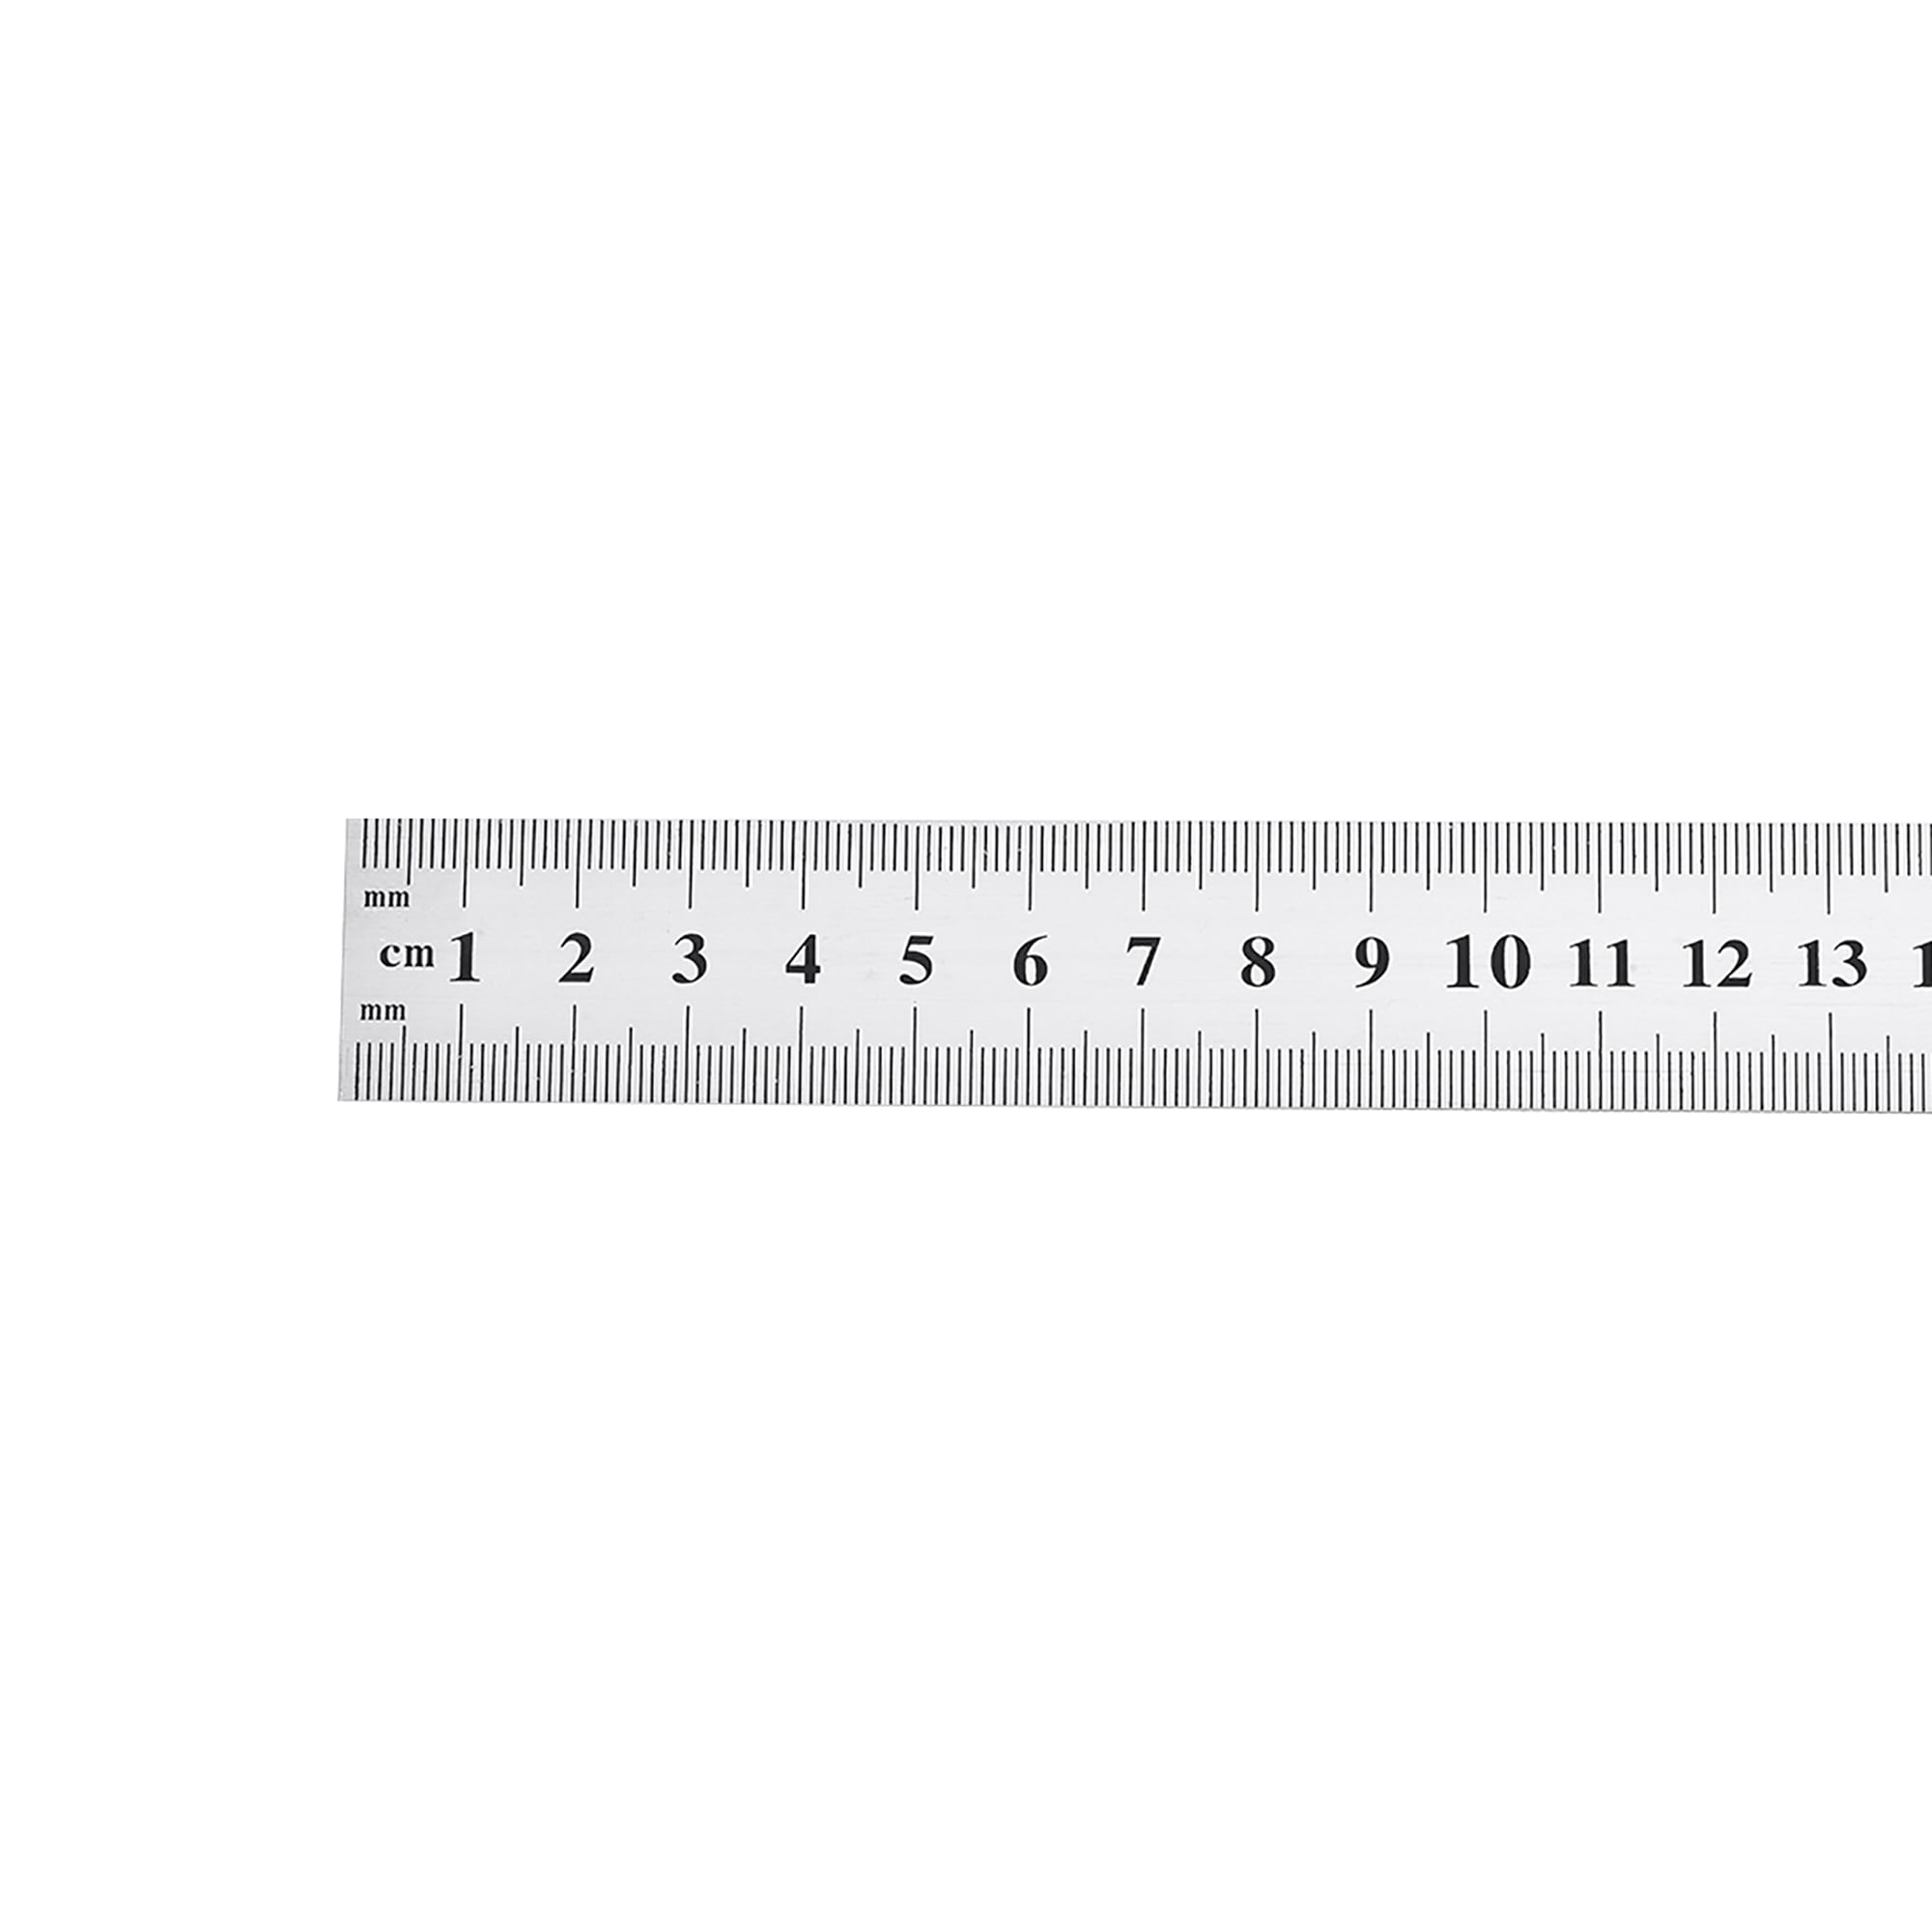 1m 40inch metric imperial stainless steel ruler straight ruler with hanging hole walmart com